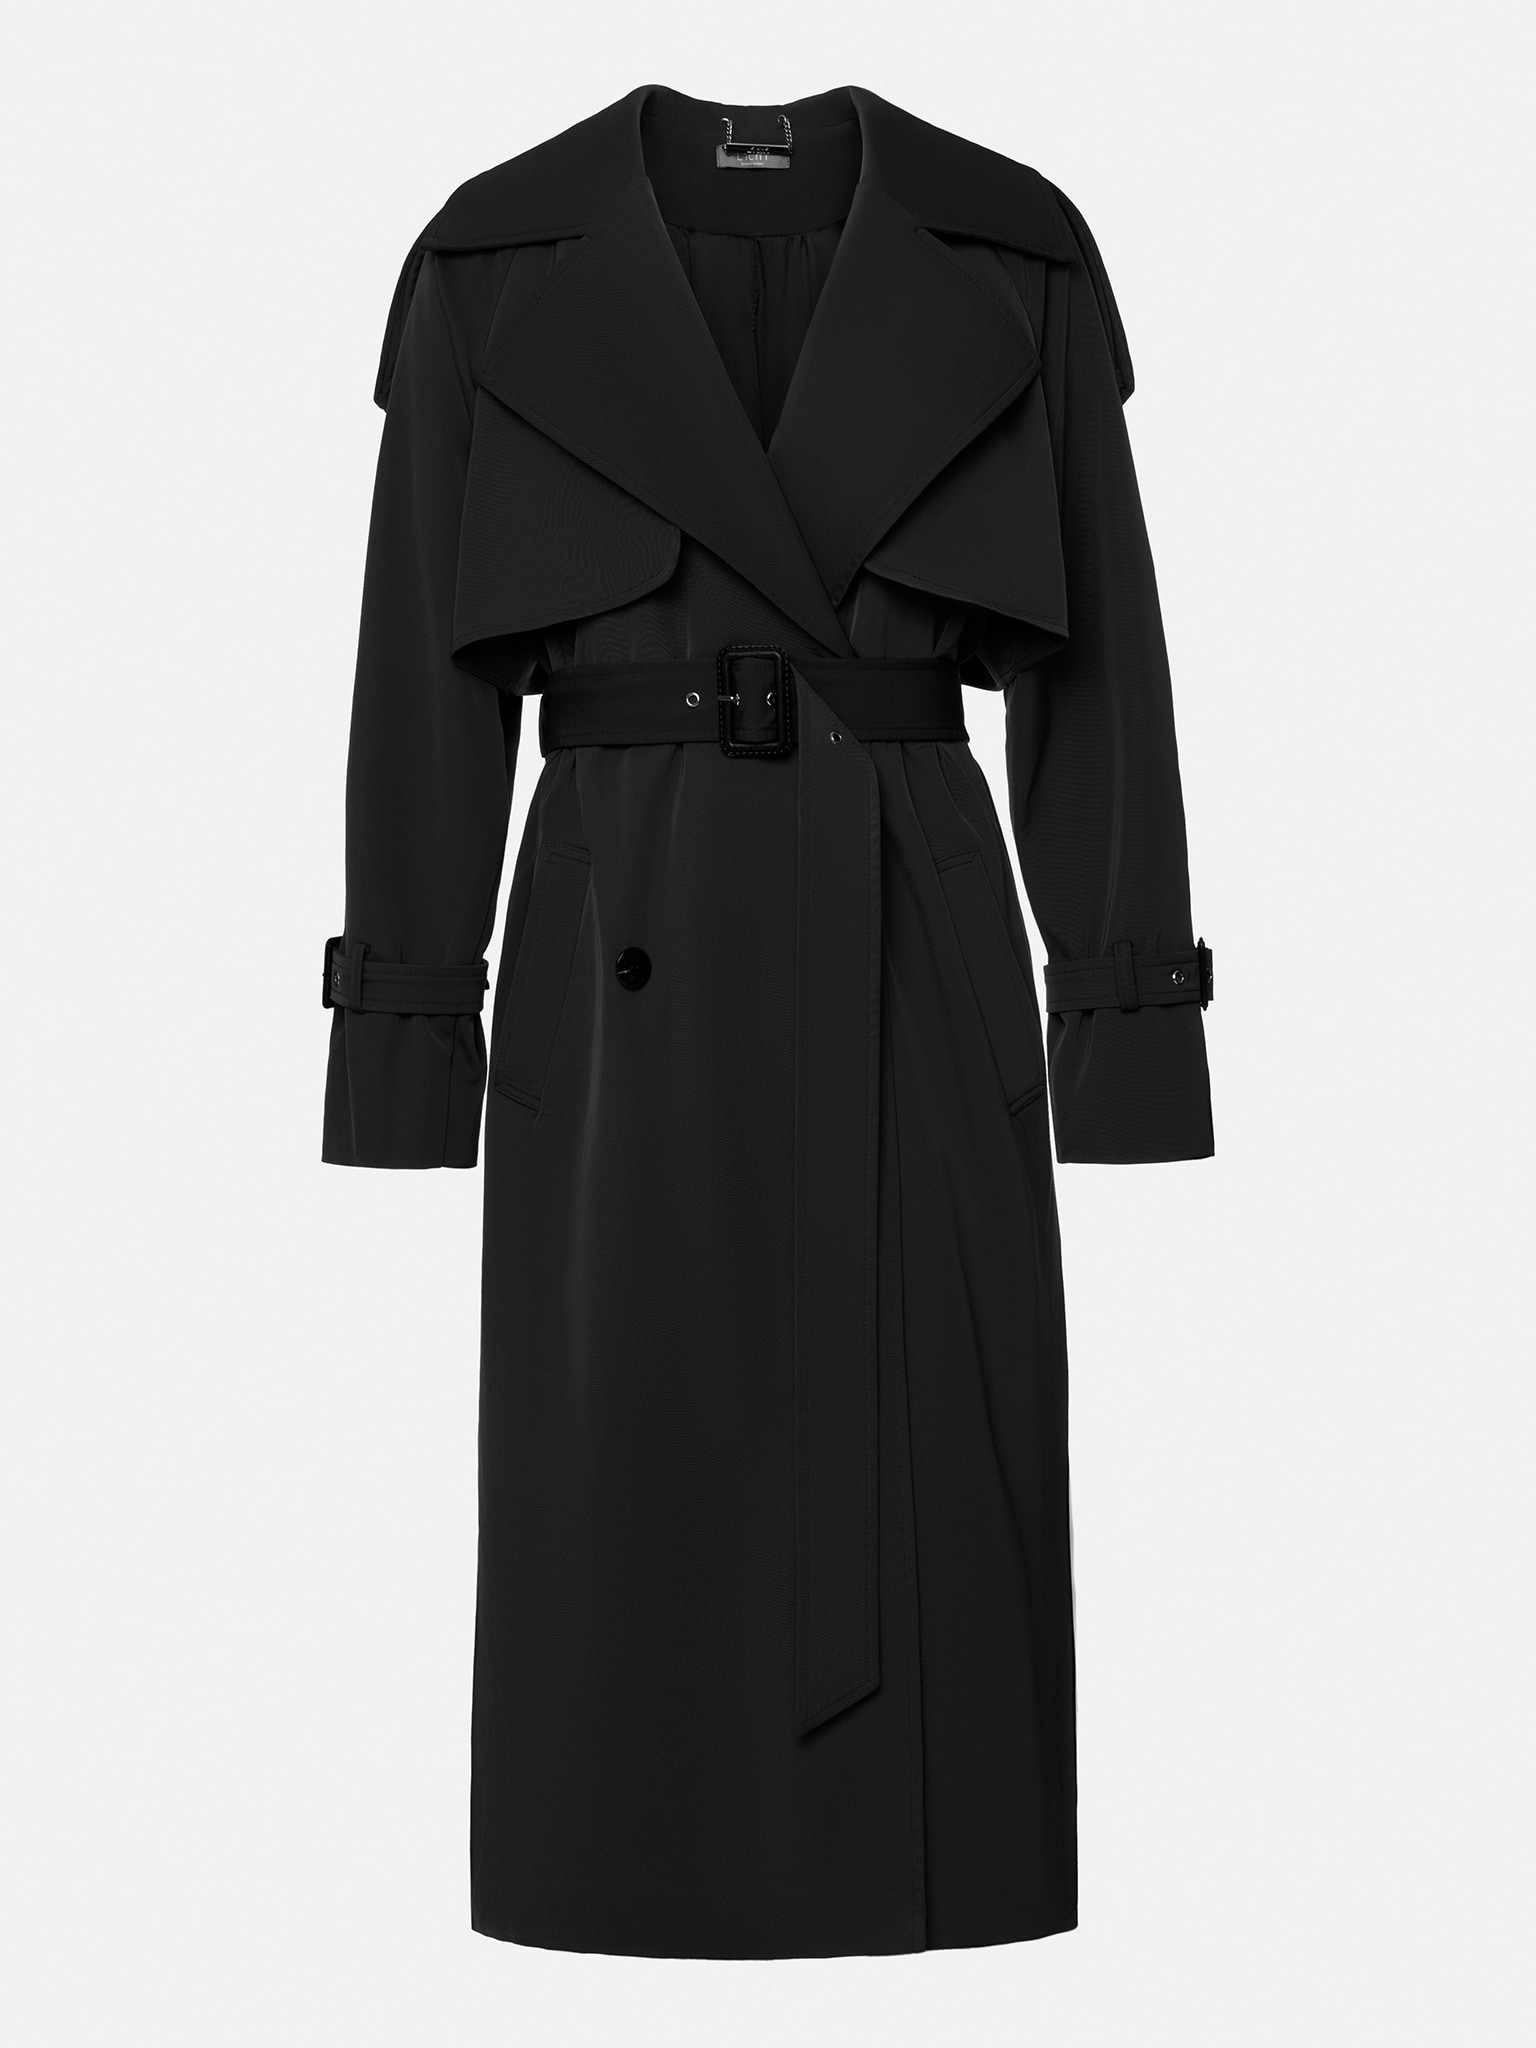 LICHI - Online fashion store :: Oversized double-breasted trench coat